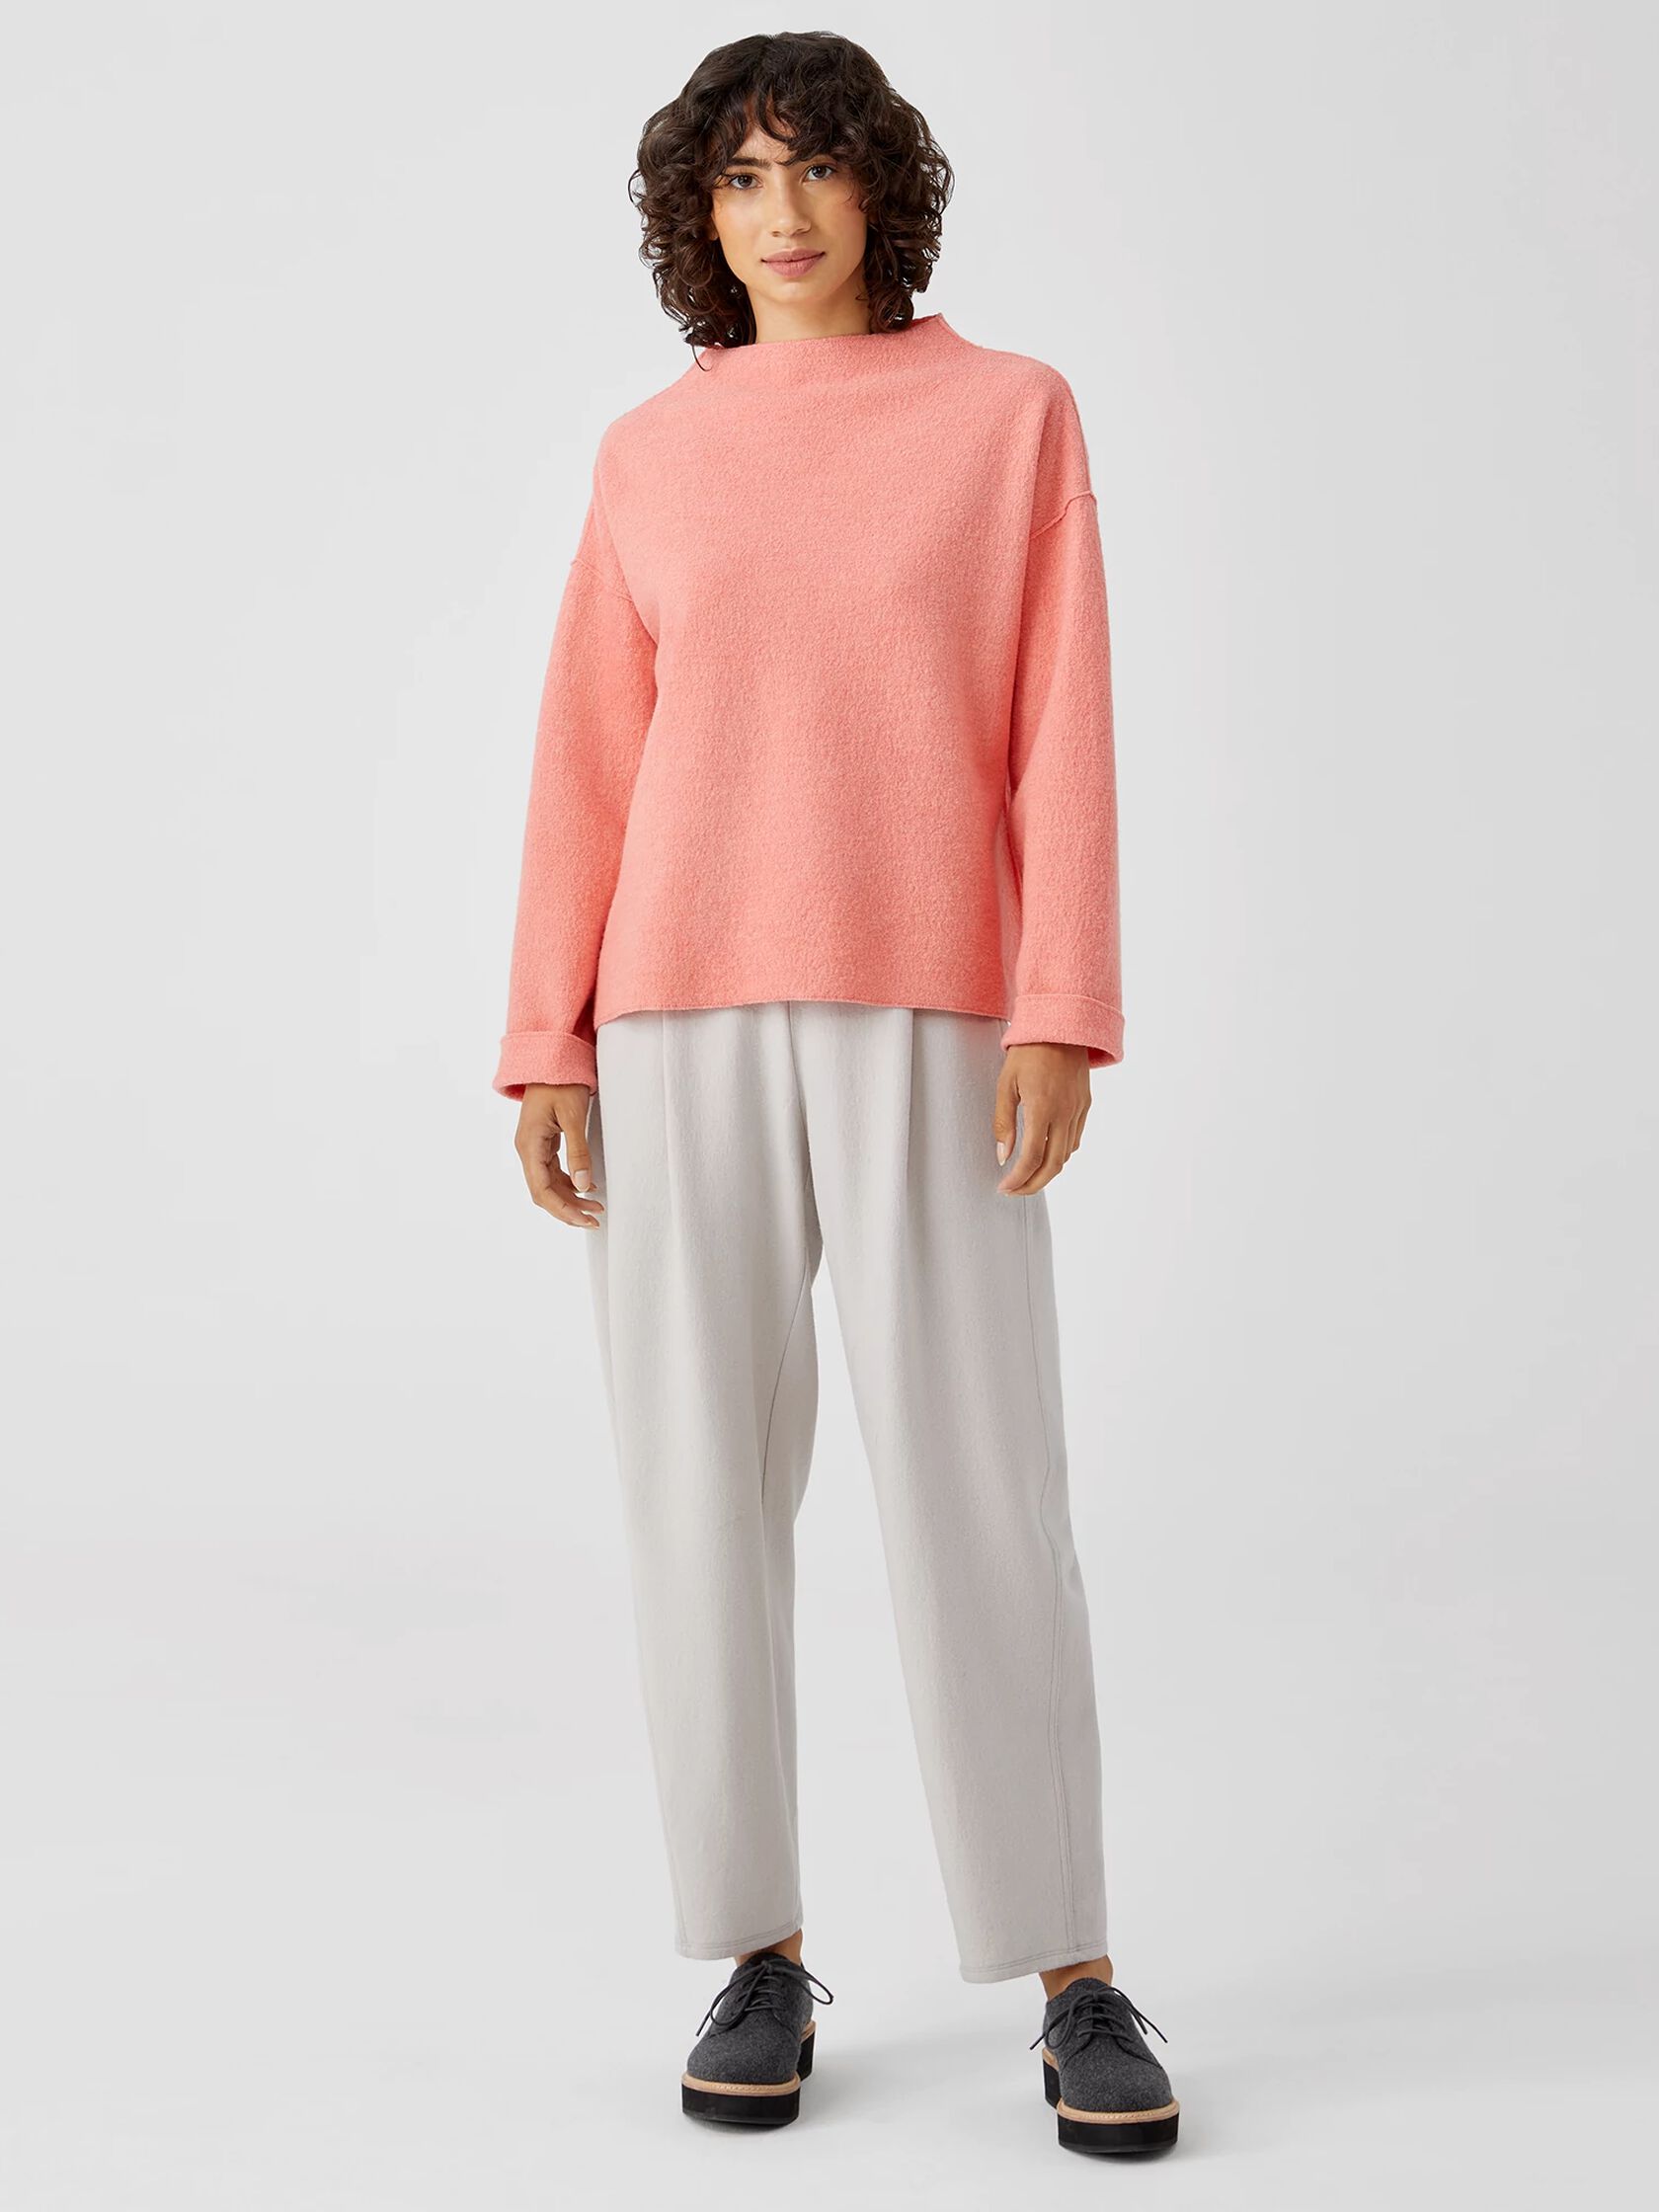 Lightweight Boiled Wool Box-Top in Responsible Wool | EILEEN FISHER